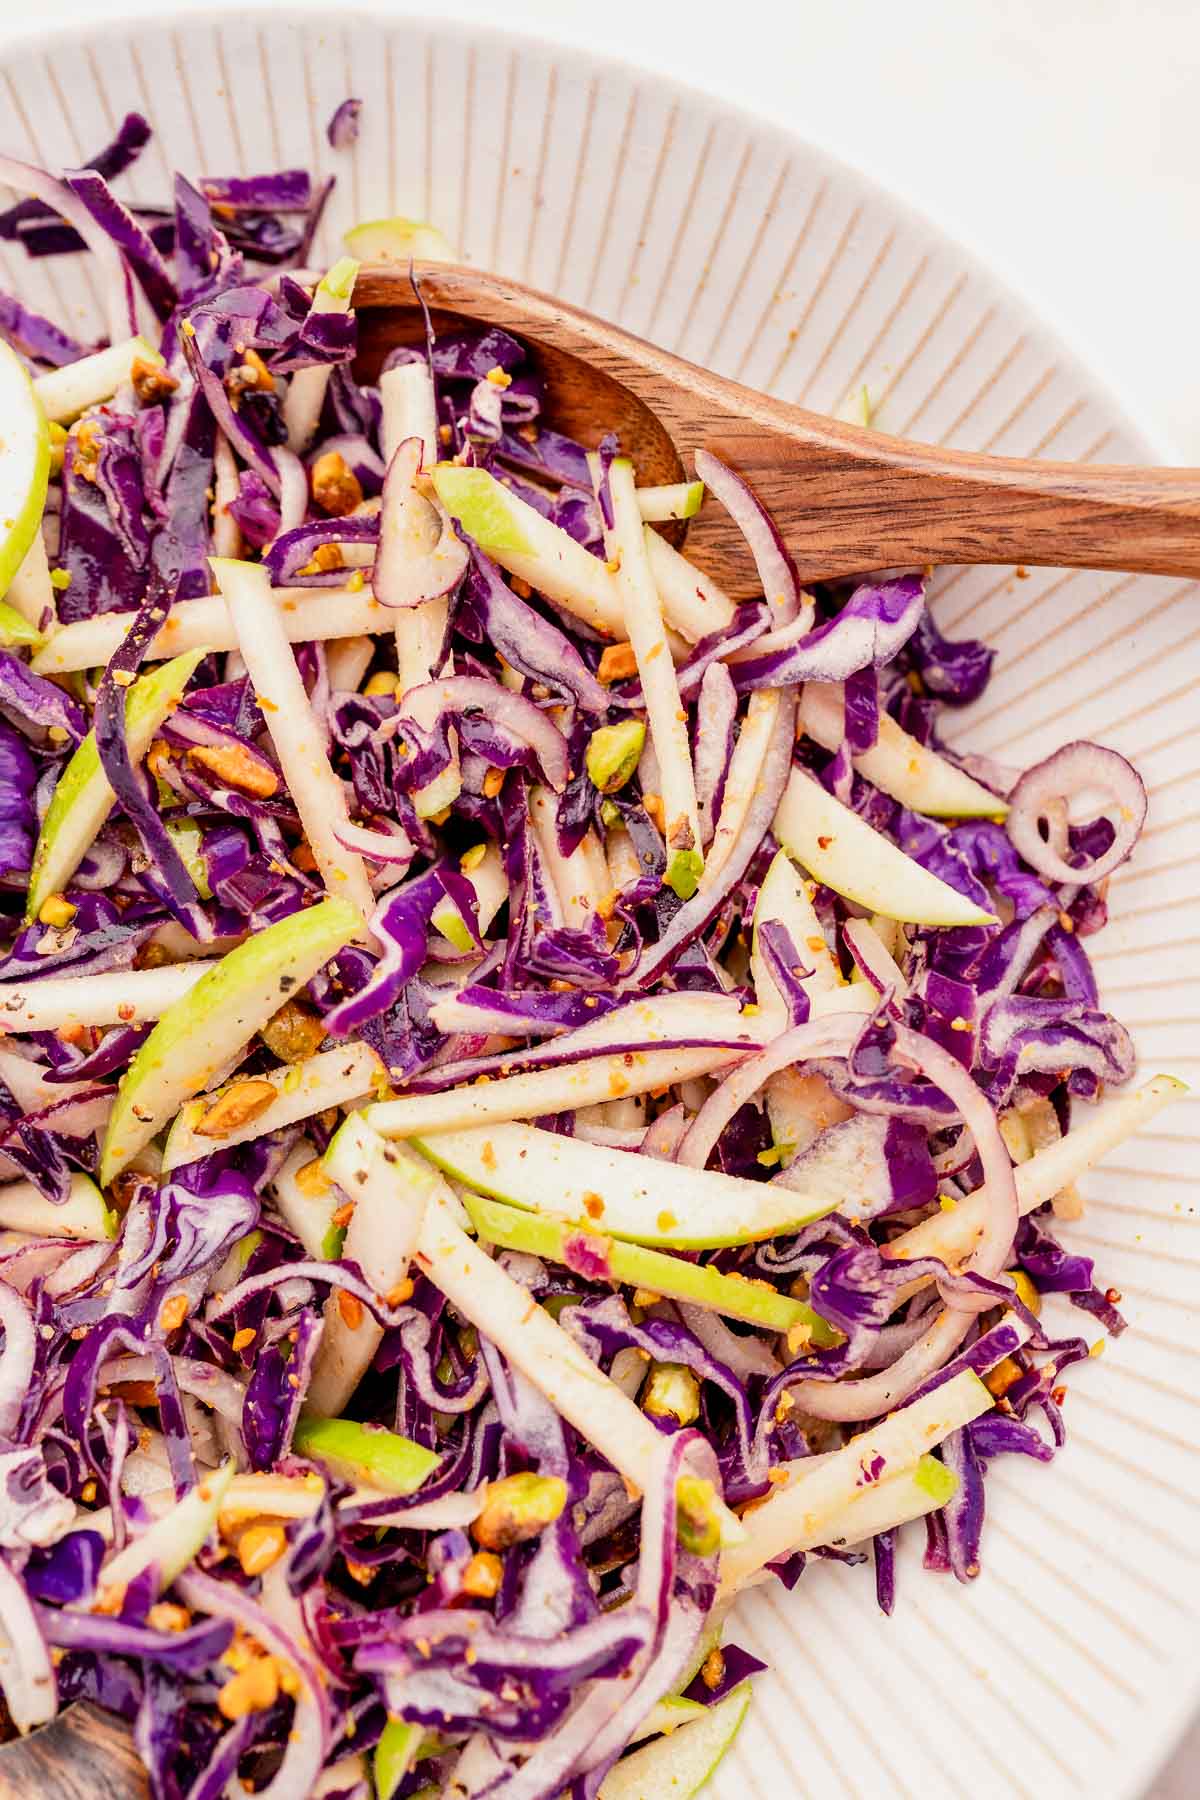 Red cabbage slaw with apples.